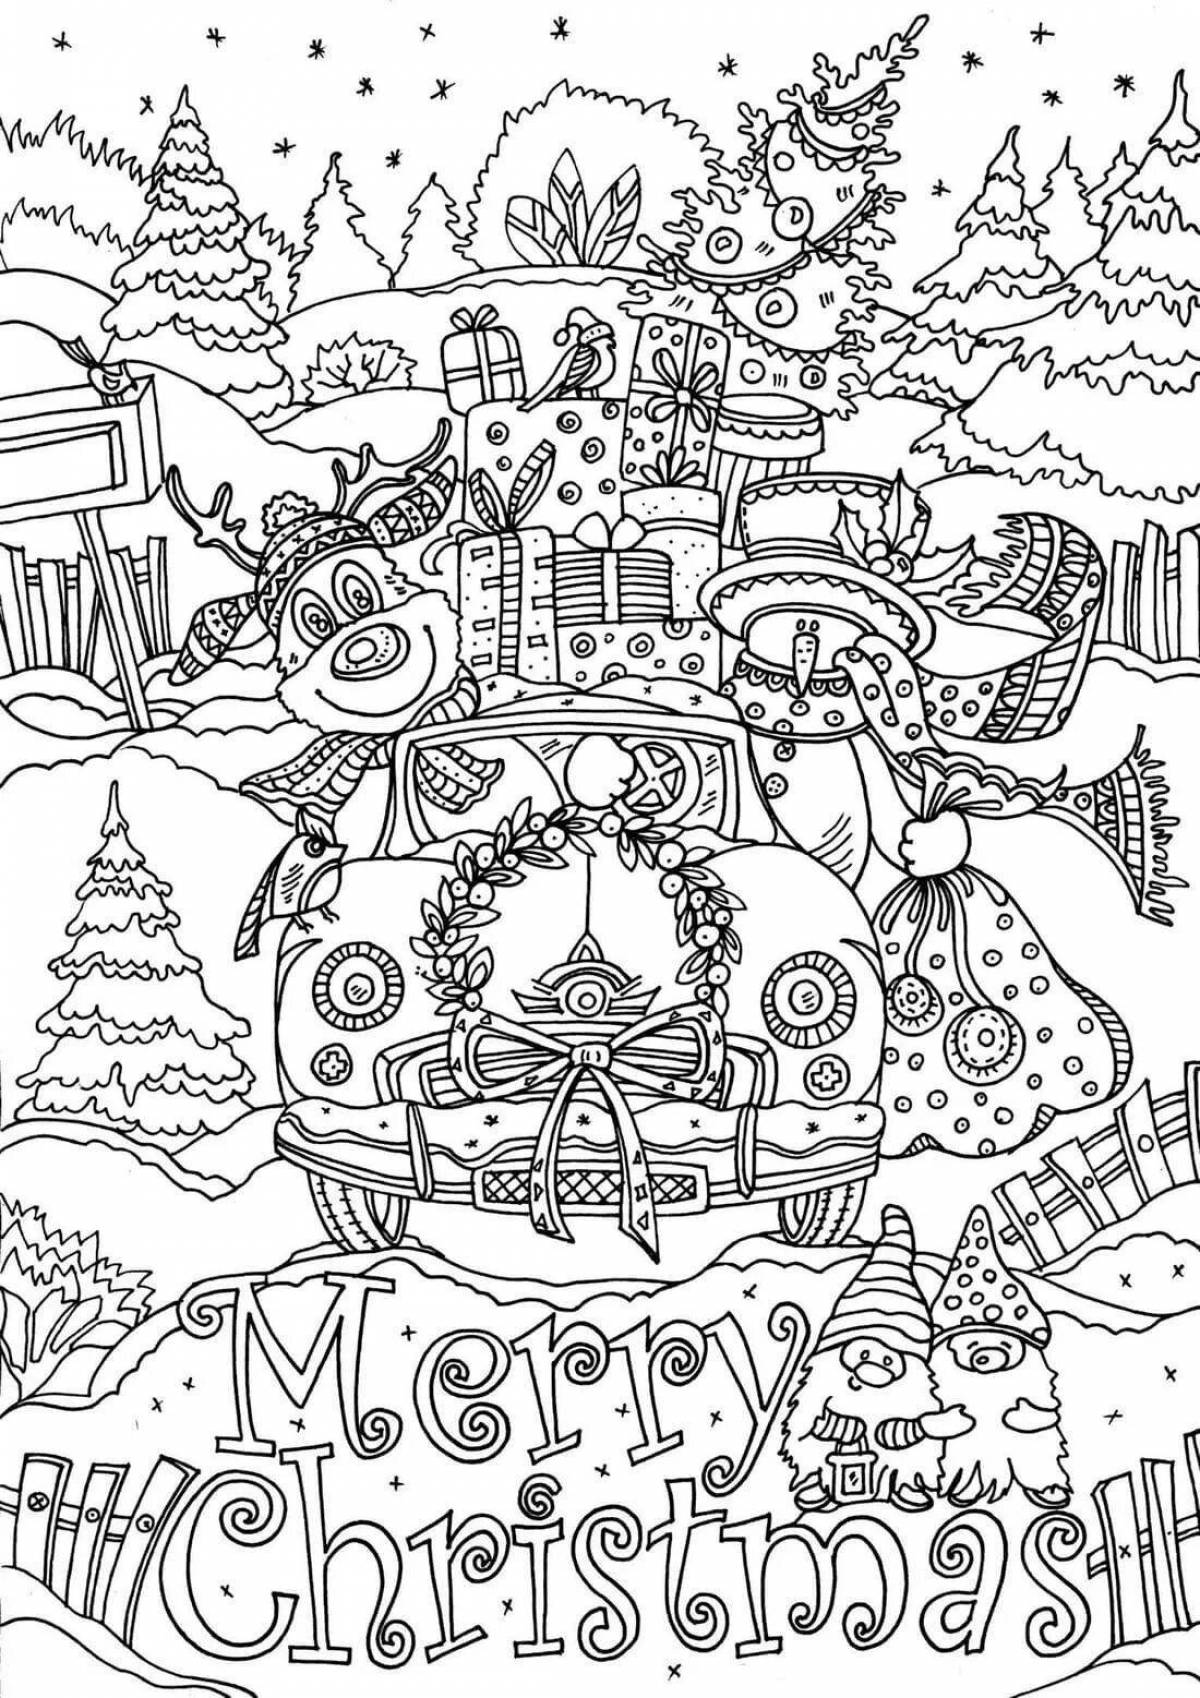 Magical winter anti-stress coloring book for kids